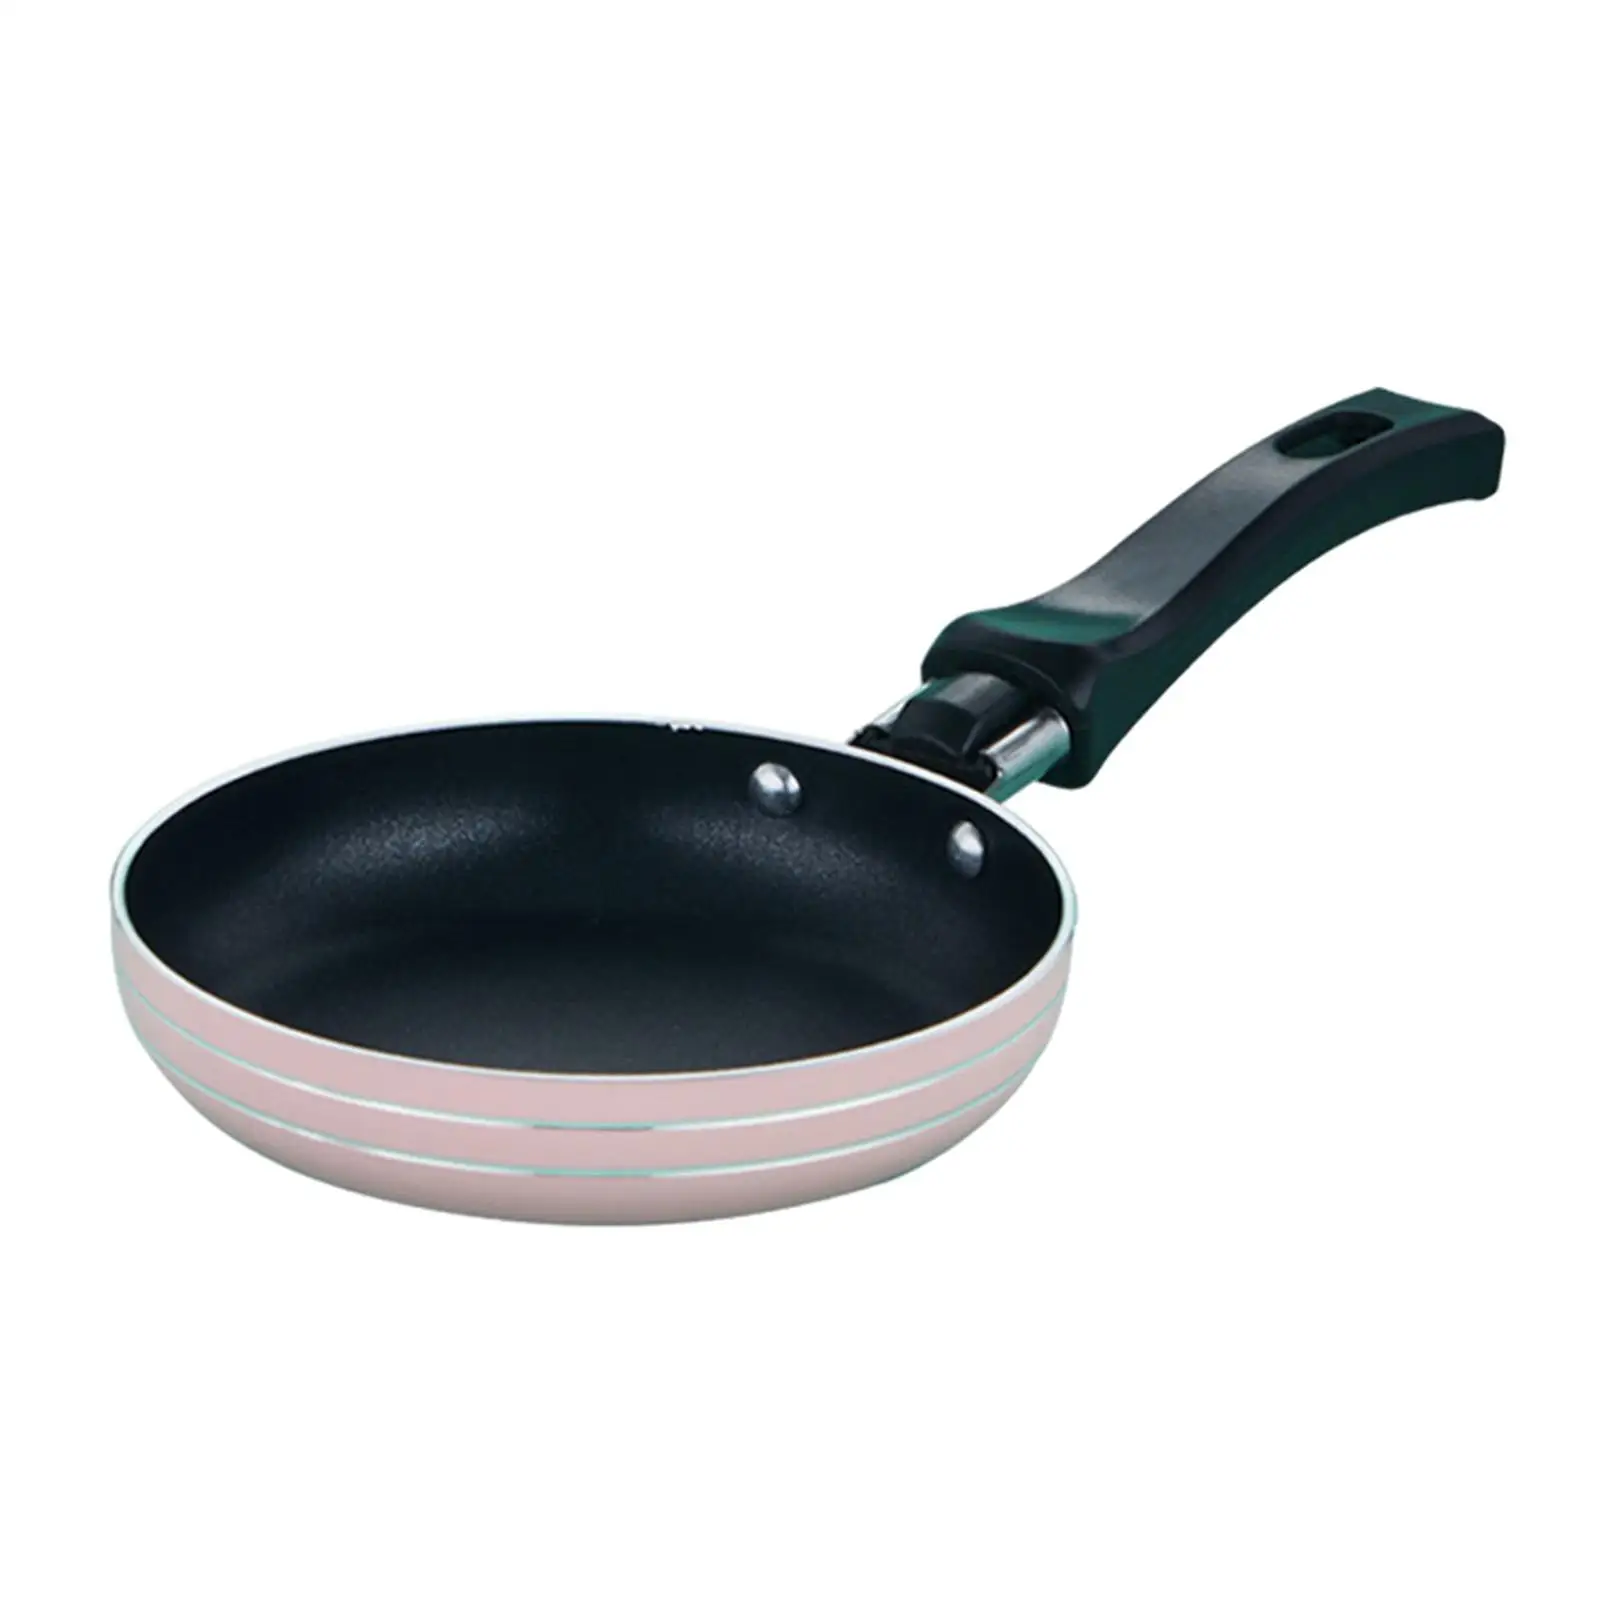 Mini Pan Metal Induction Pan Skillet with Long Handle for Kids Cooking Toy Small Pan for Toddlers Children Ages 3 Years and up